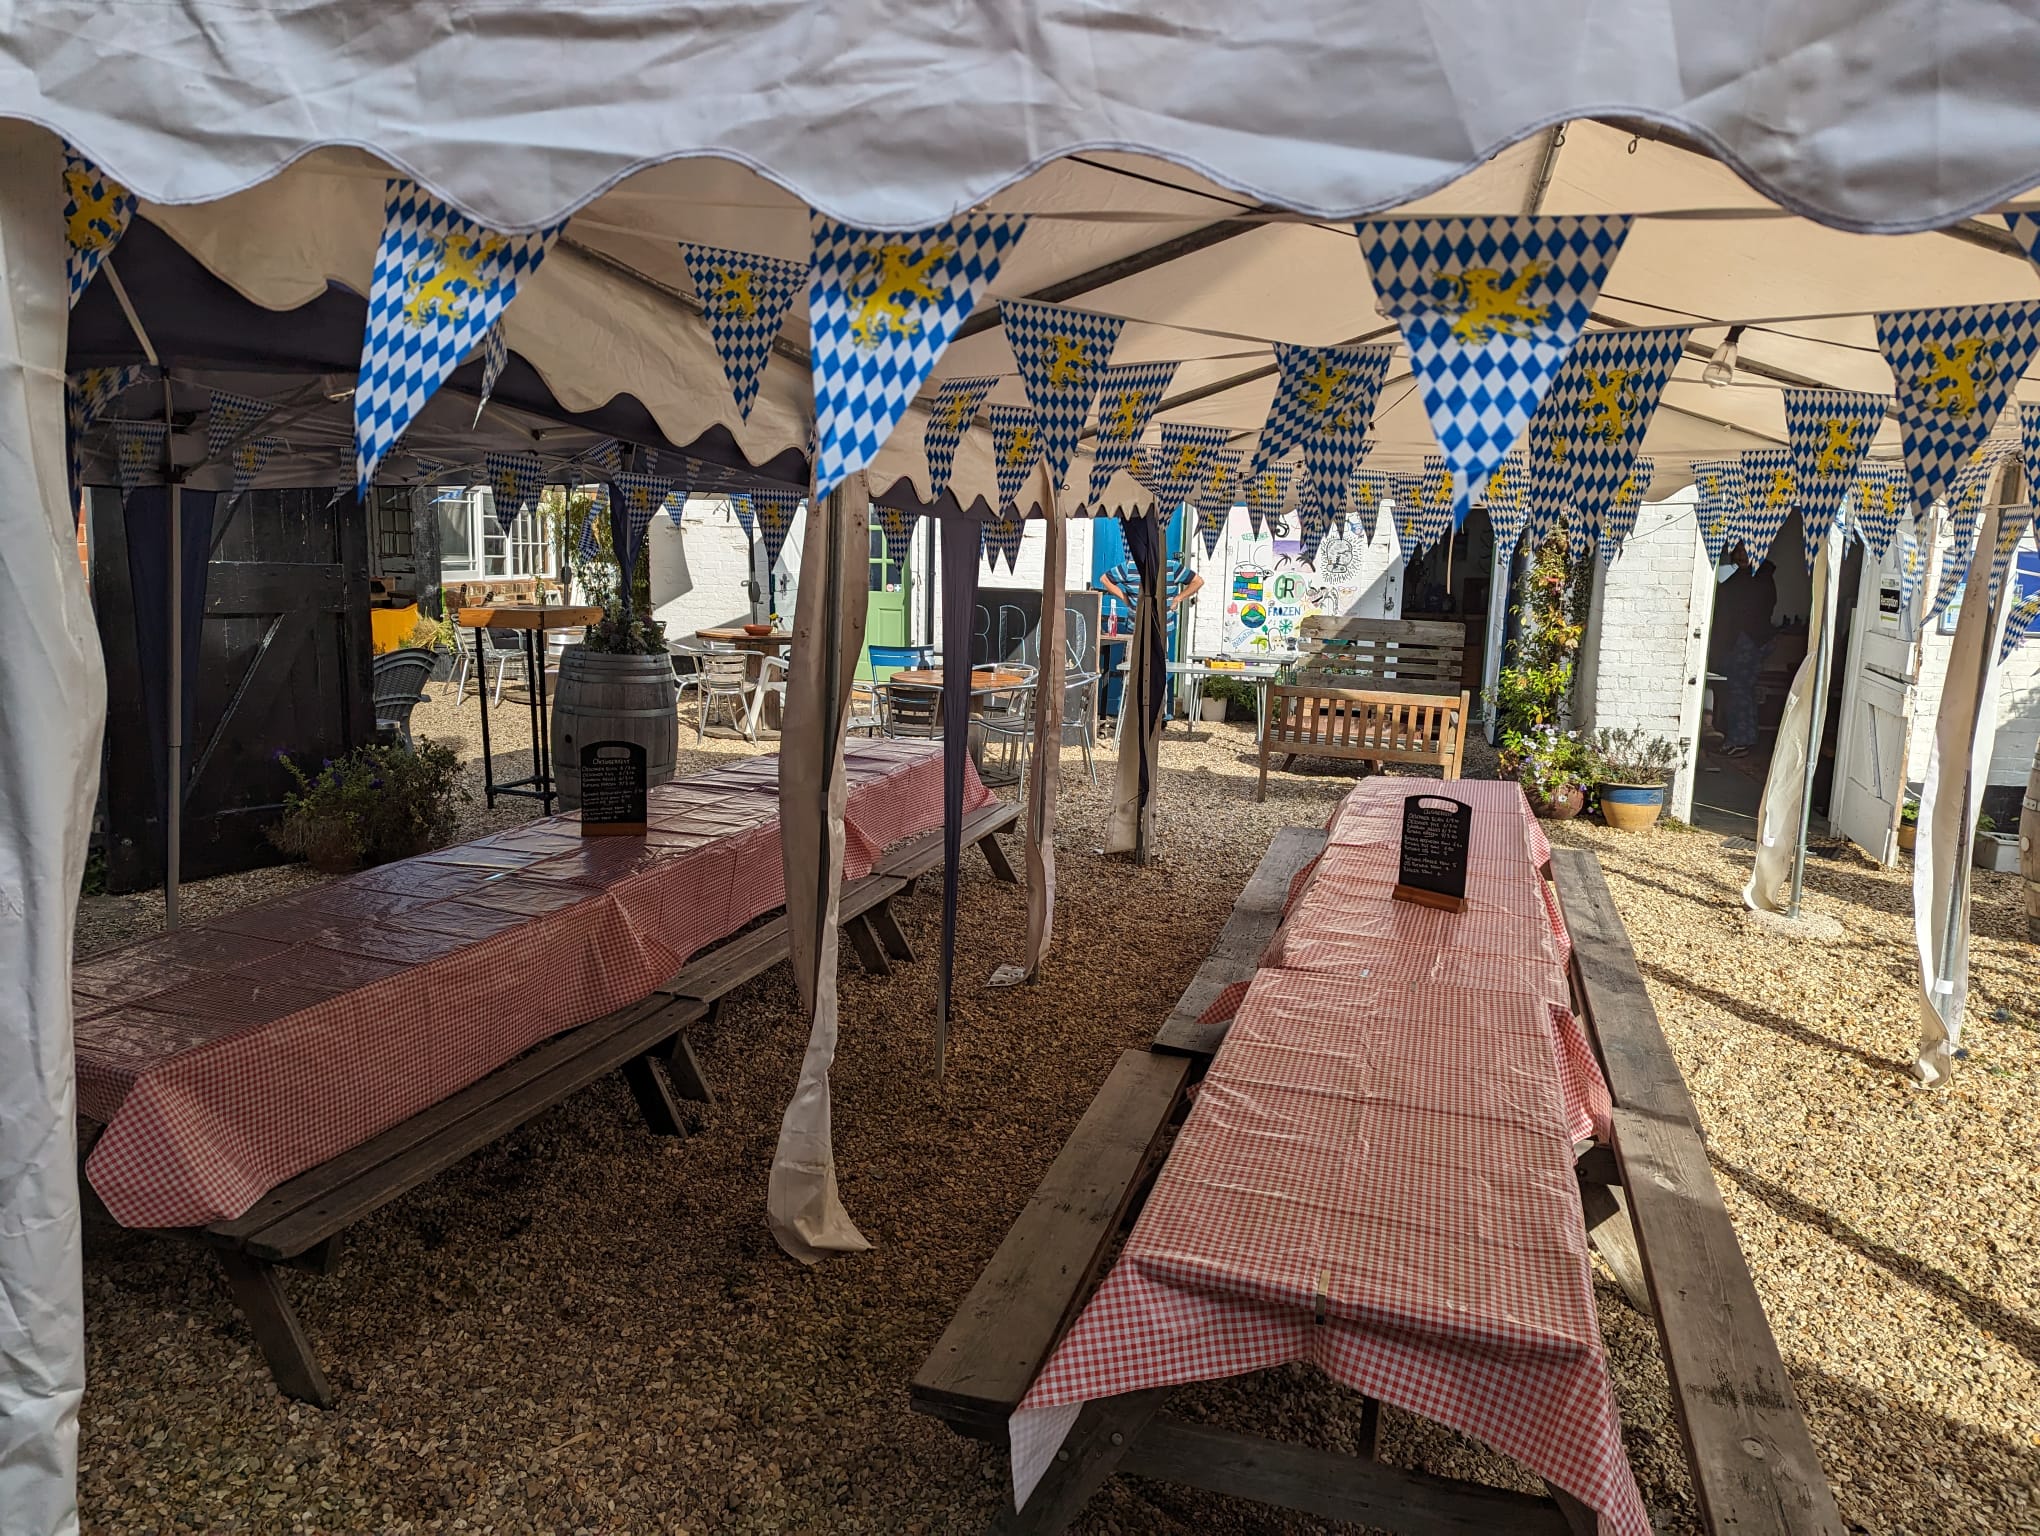 The Courtyard benches were lined up and decorated in a German beer festival theme.